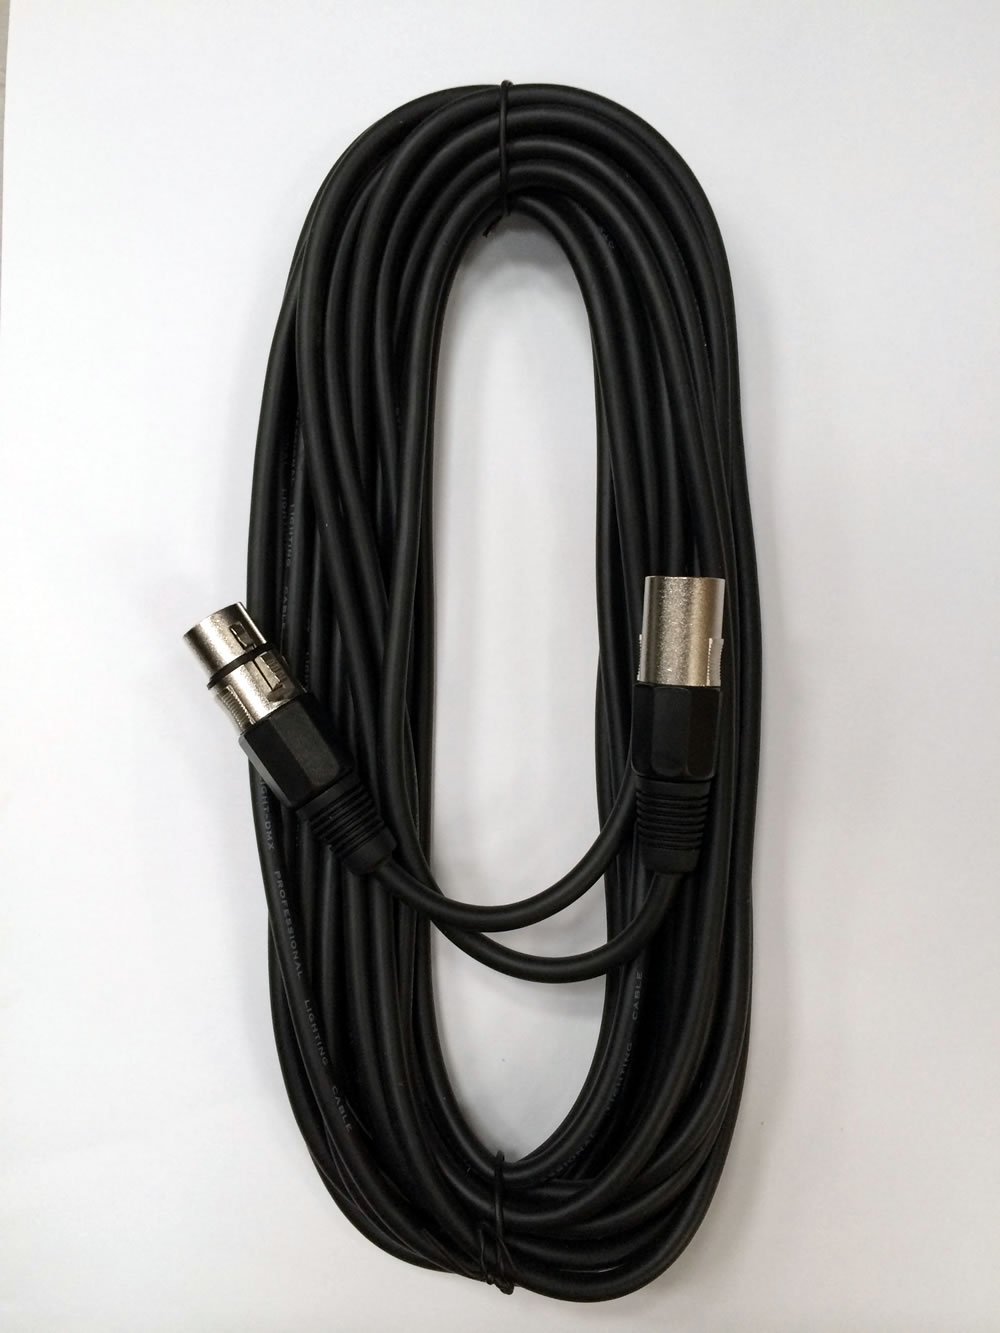 High Quality DMX Cable 10m